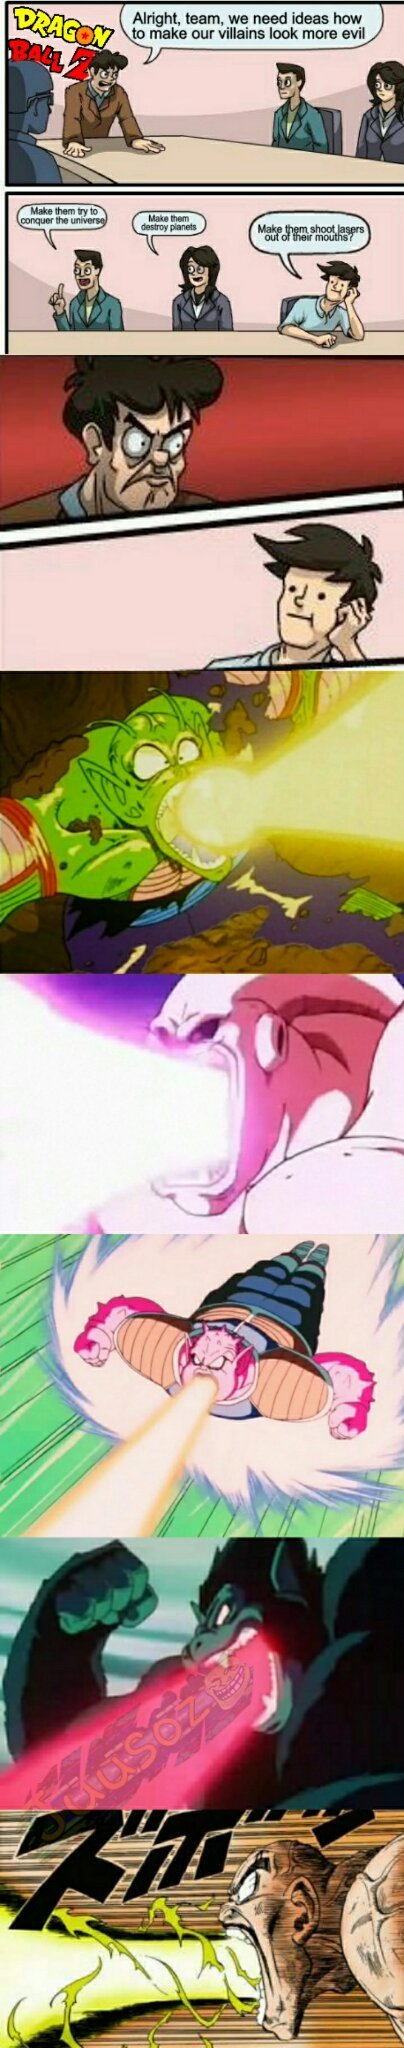 Frieza was one of the only main villains that didn't shoot mouth lasers. - meme